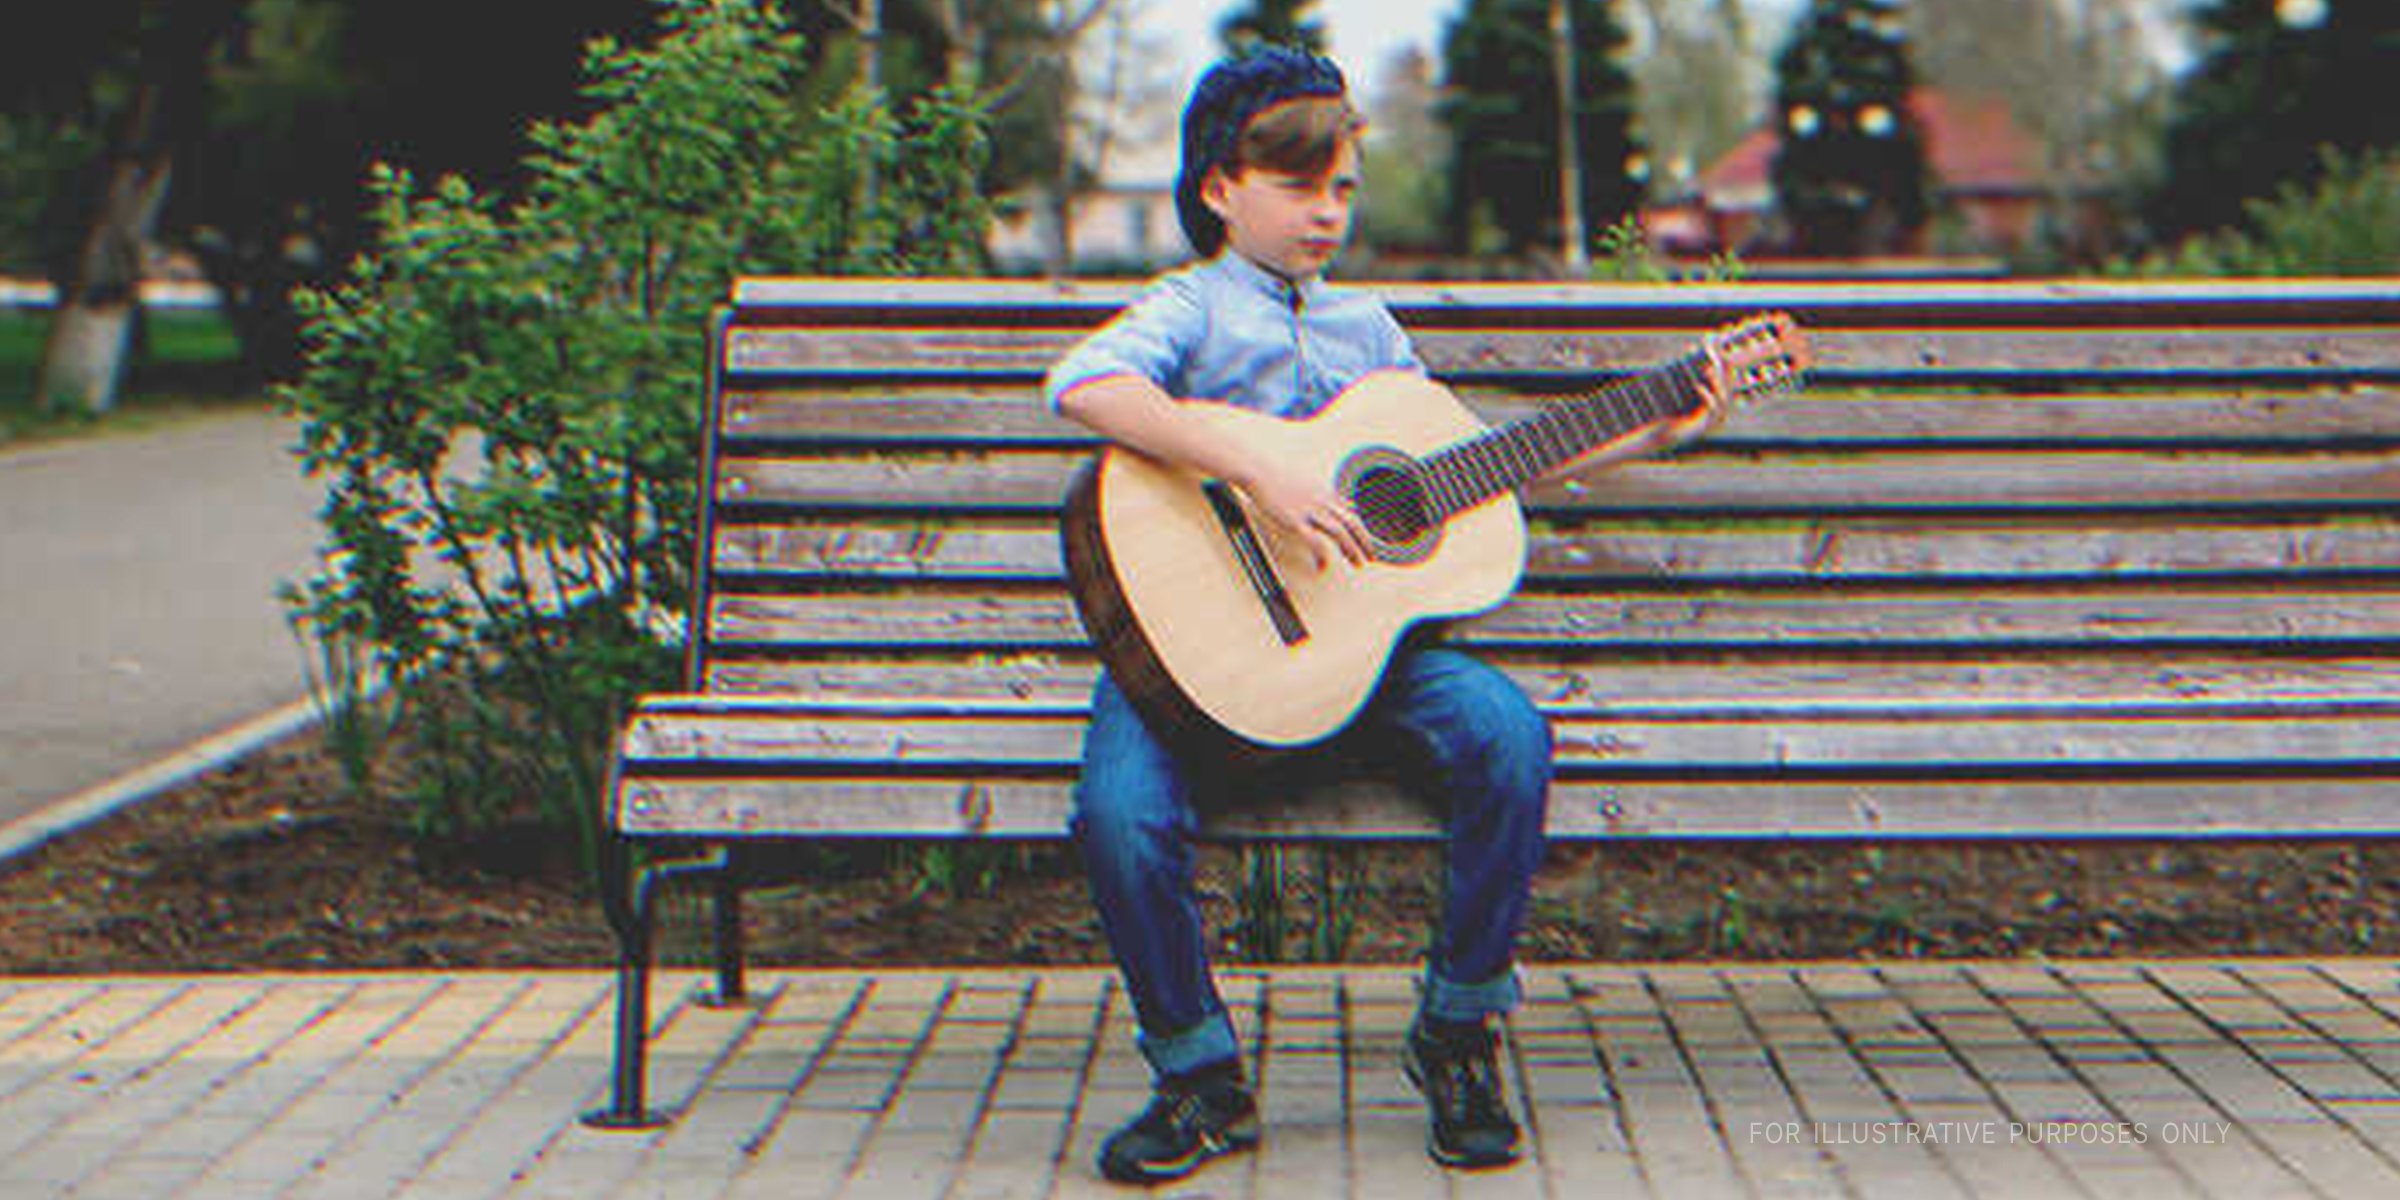 Boy playing guitar on a bench. | Getty Images